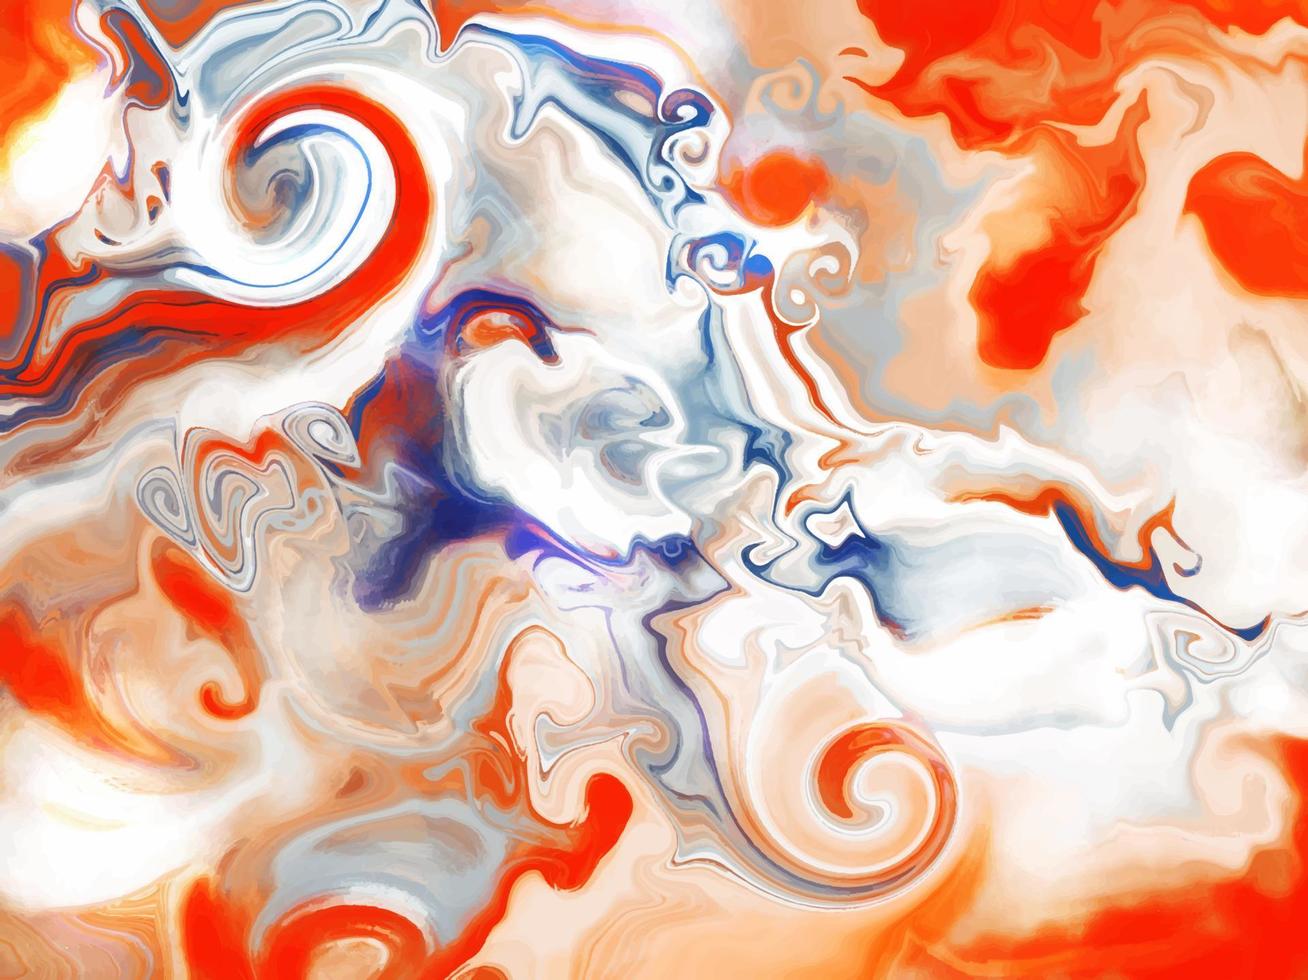 Abstract alcohol ink texture marble style background. vector